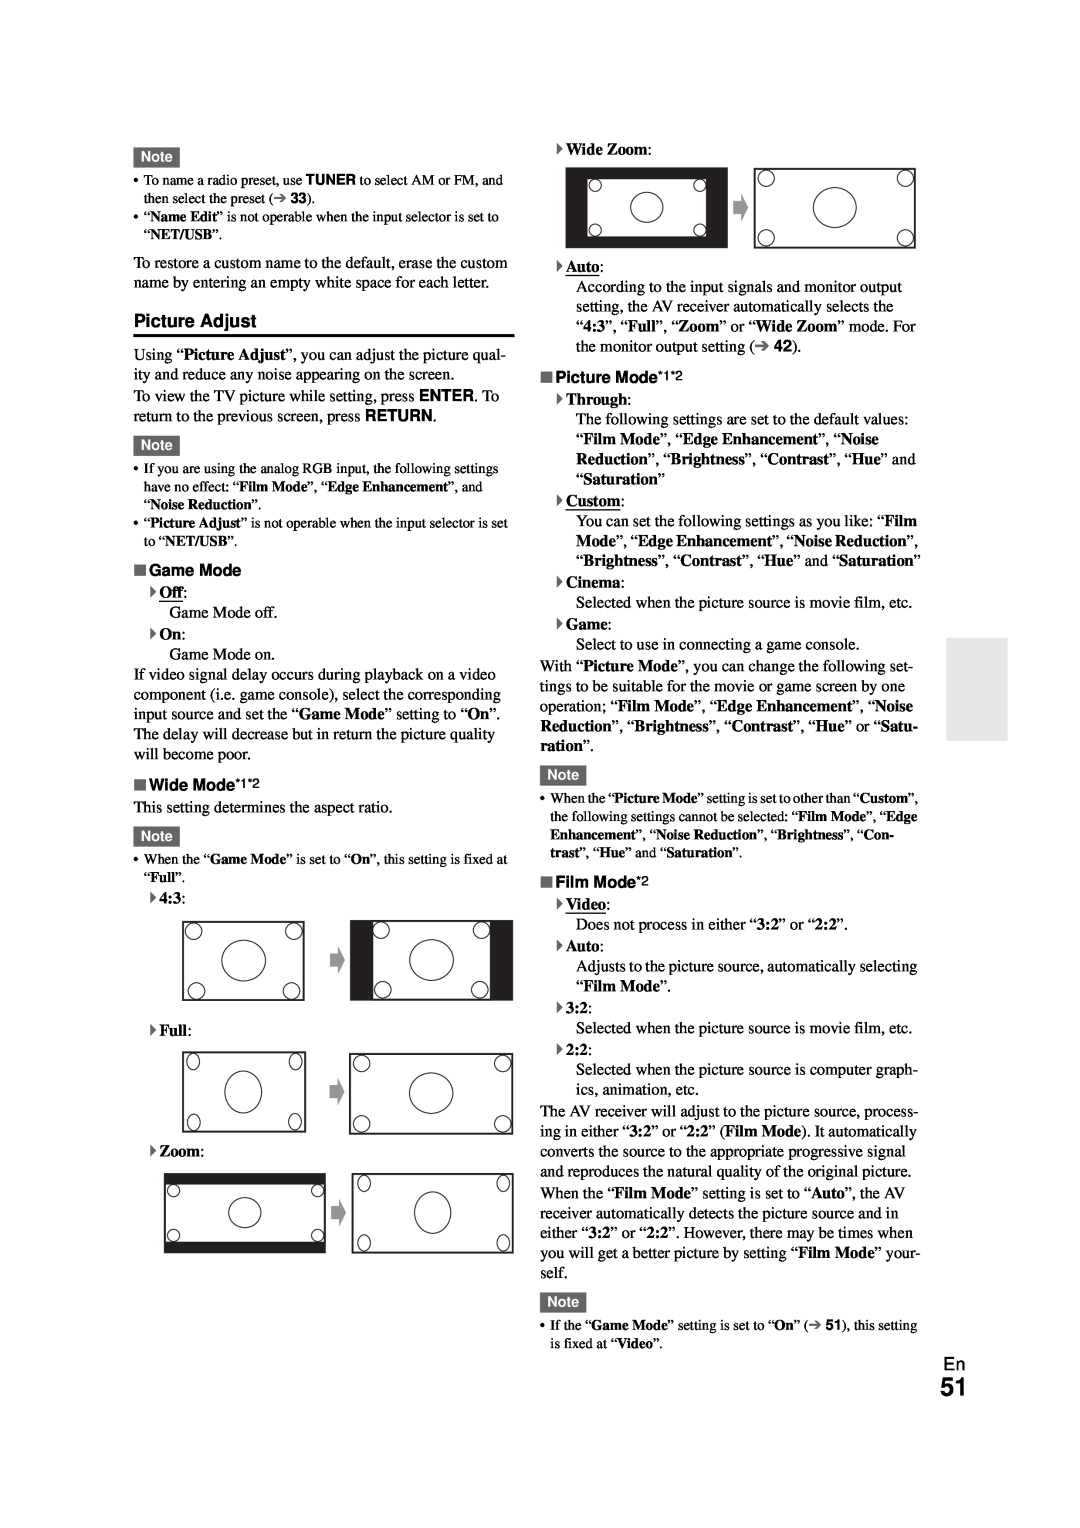 Onkyo HT-RC270 instruction manual Picture Adjust, Game Mode, Wide Mode*1*2, Picture Mode*1*2, Film Mode*2 